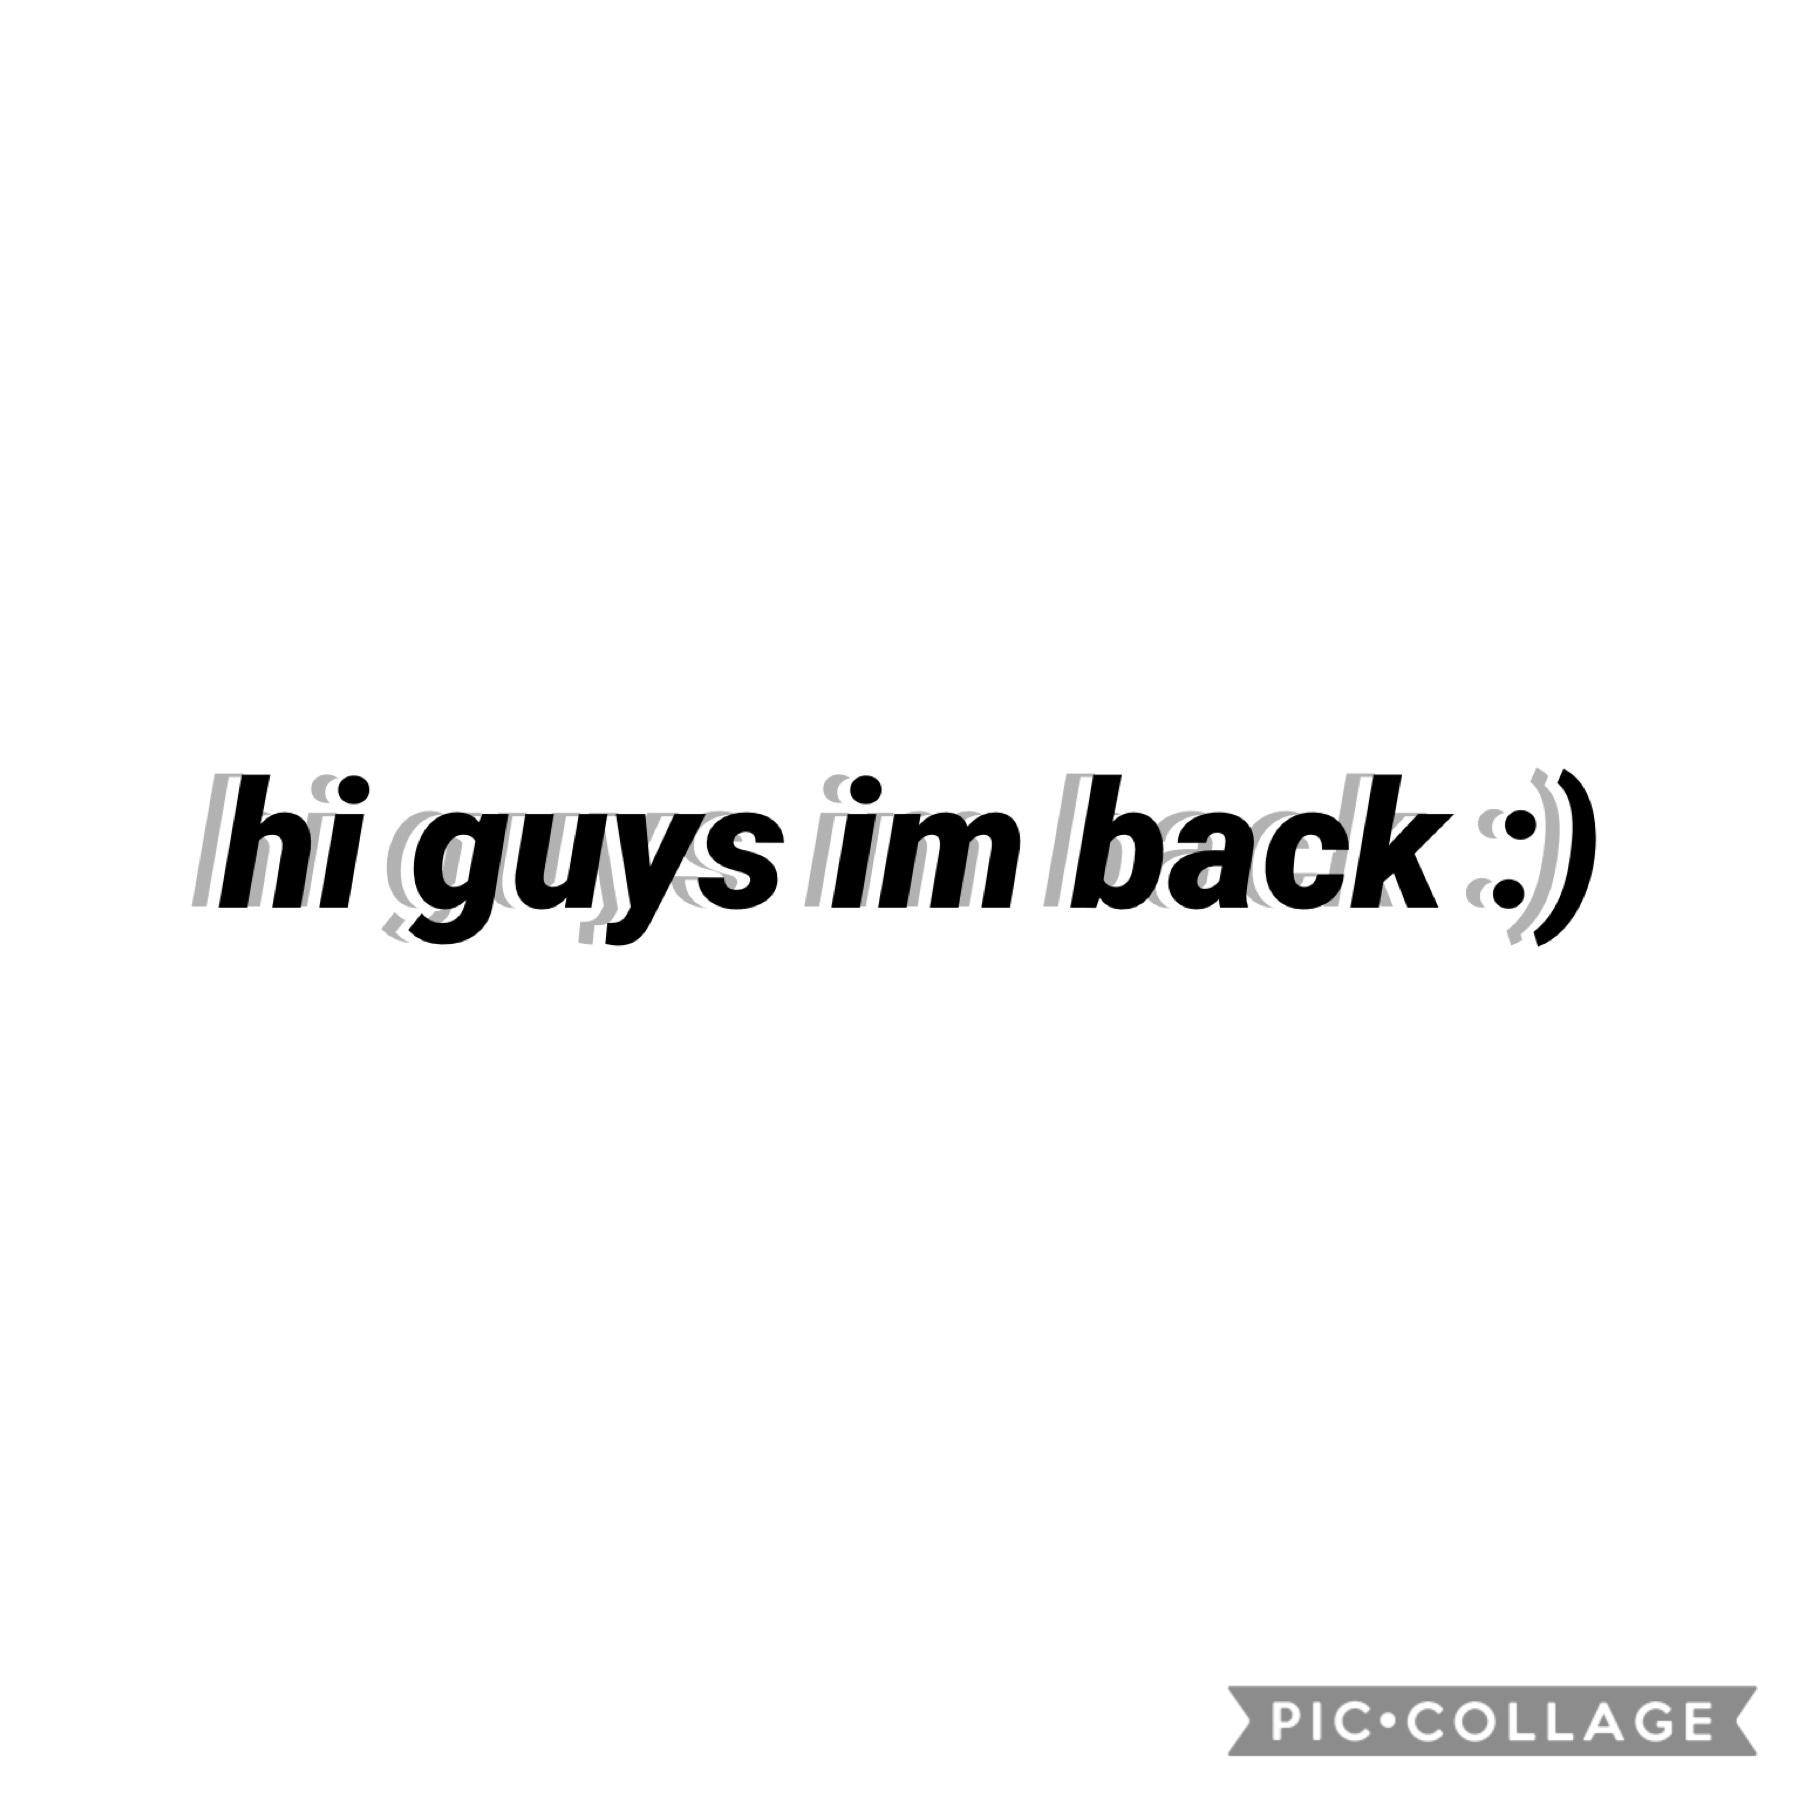 OMG it’s been a rlly long time....sorry i took a break without letting u guys know. shoutouts appreciated:) anyway, I’m not gonna be making collages but ill be started a fresh new theme. you will see in my next post x 💗